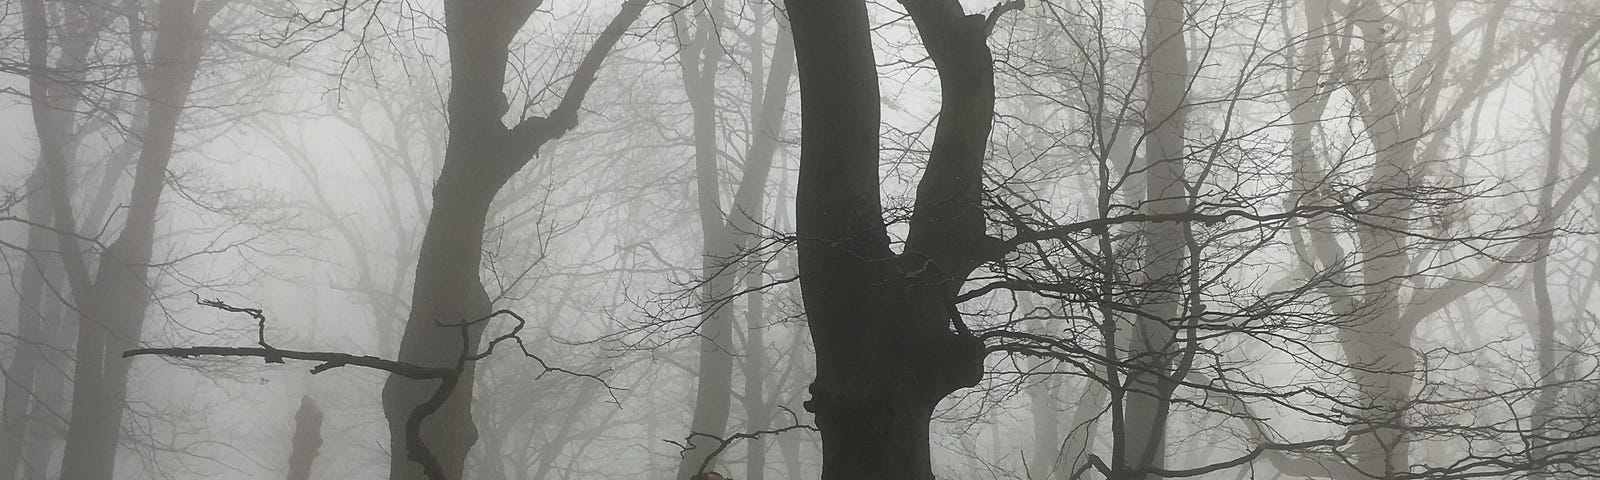 A misty forest with bare trees.